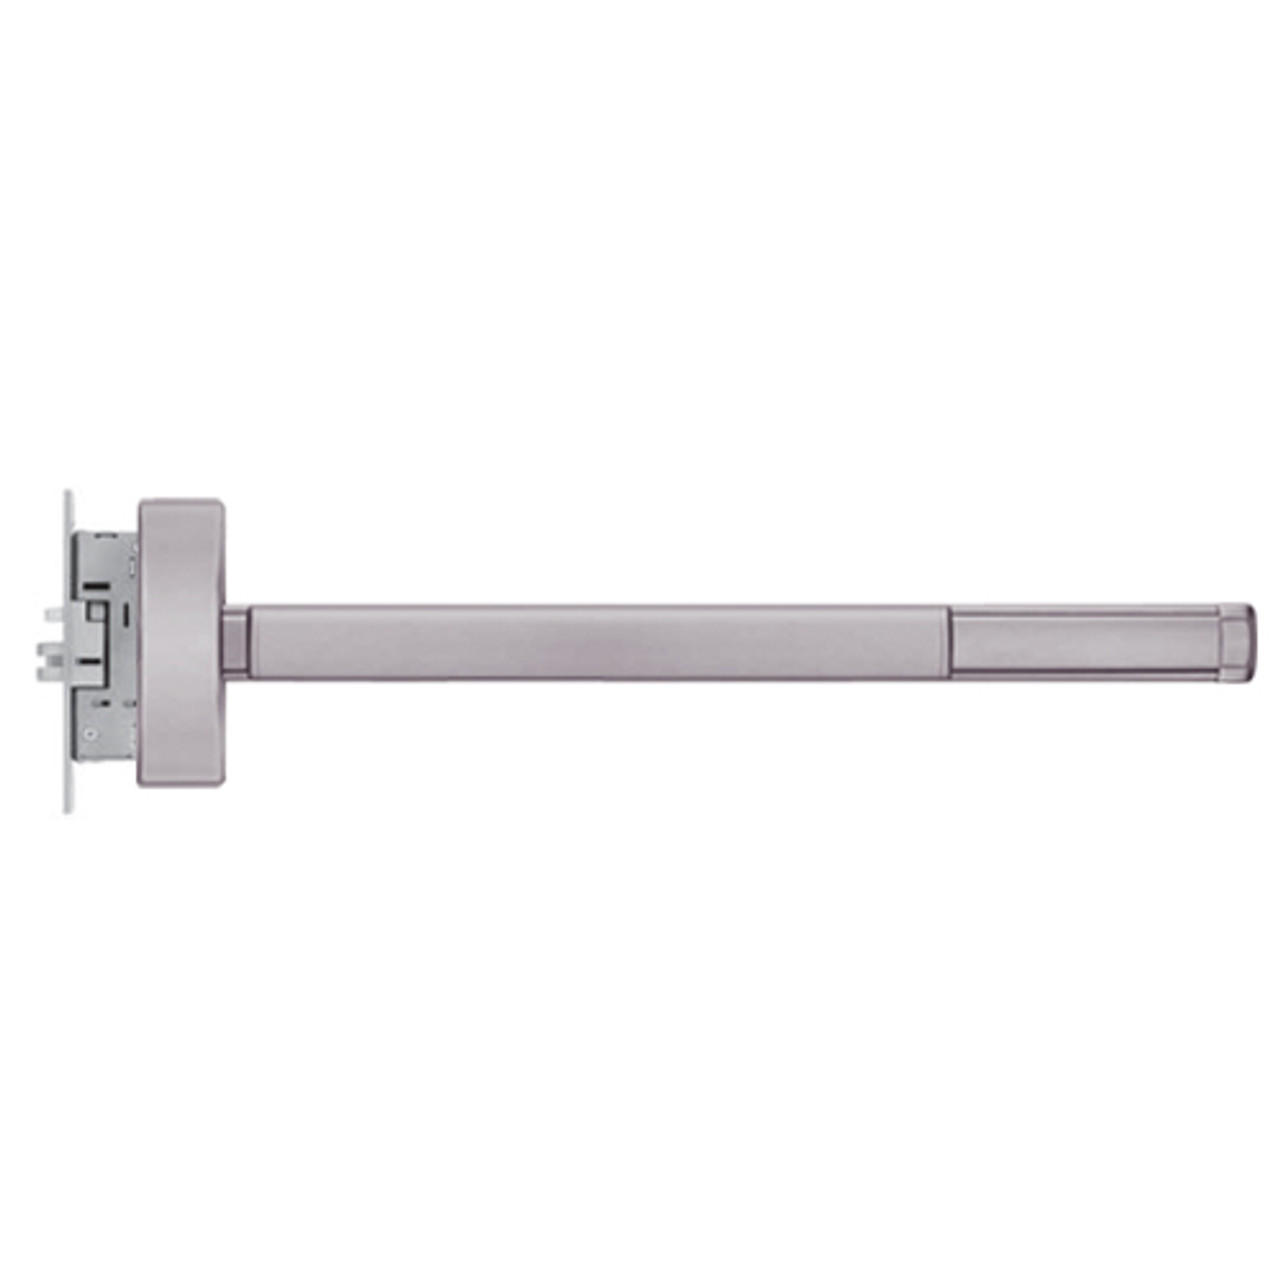 TSFL2303-RHR-630-36 PHI 2300 Series Fire Rated Apex Mortise Exit Device with Touchbar Monitoring Switch Prepped for Key Retracts Latchbolt in Satin Stainless Steel Finish